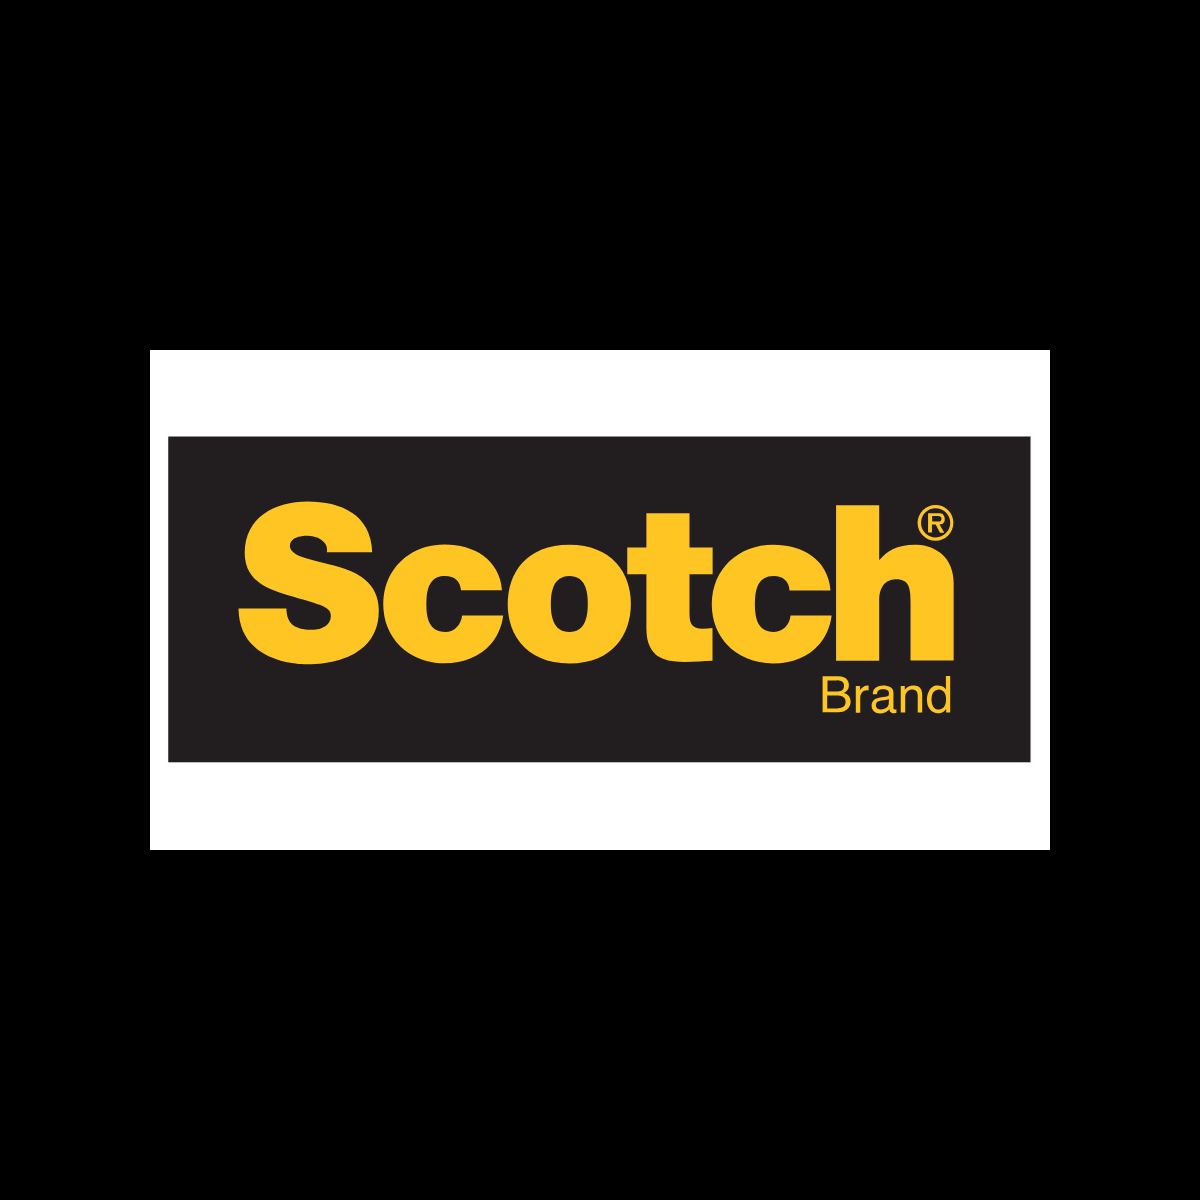 Where to Buy Scotch Brand Products